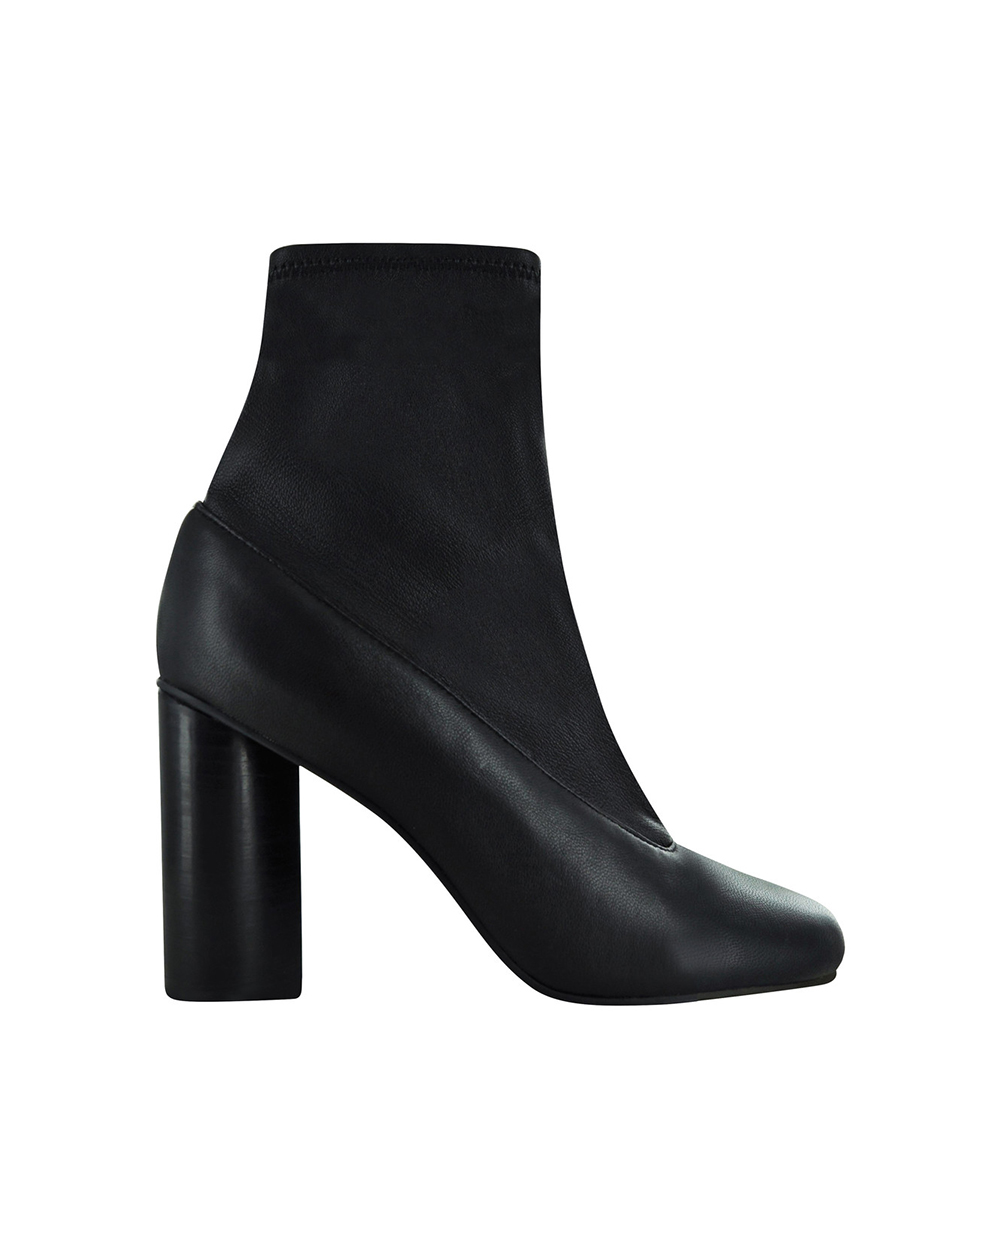 Sonia I Boots, $345 AUD, from SENSO